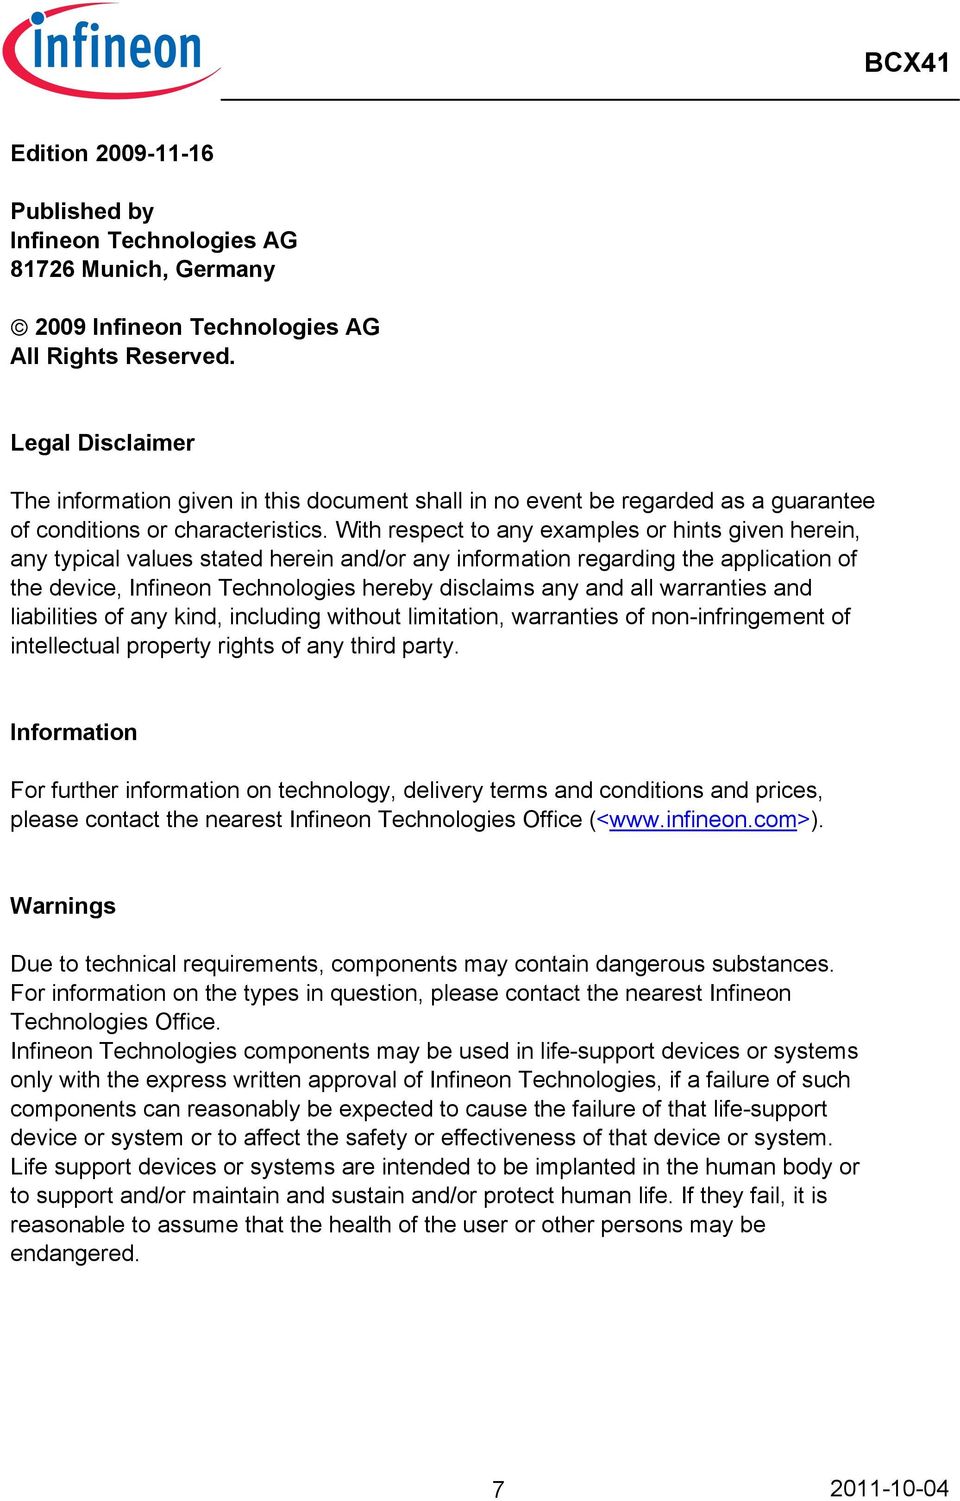 With respect to any examples or hints given herein, any typical values stated herein and/or any information regarding the application of the device, Infineon Technologies hereby disclaims any and all